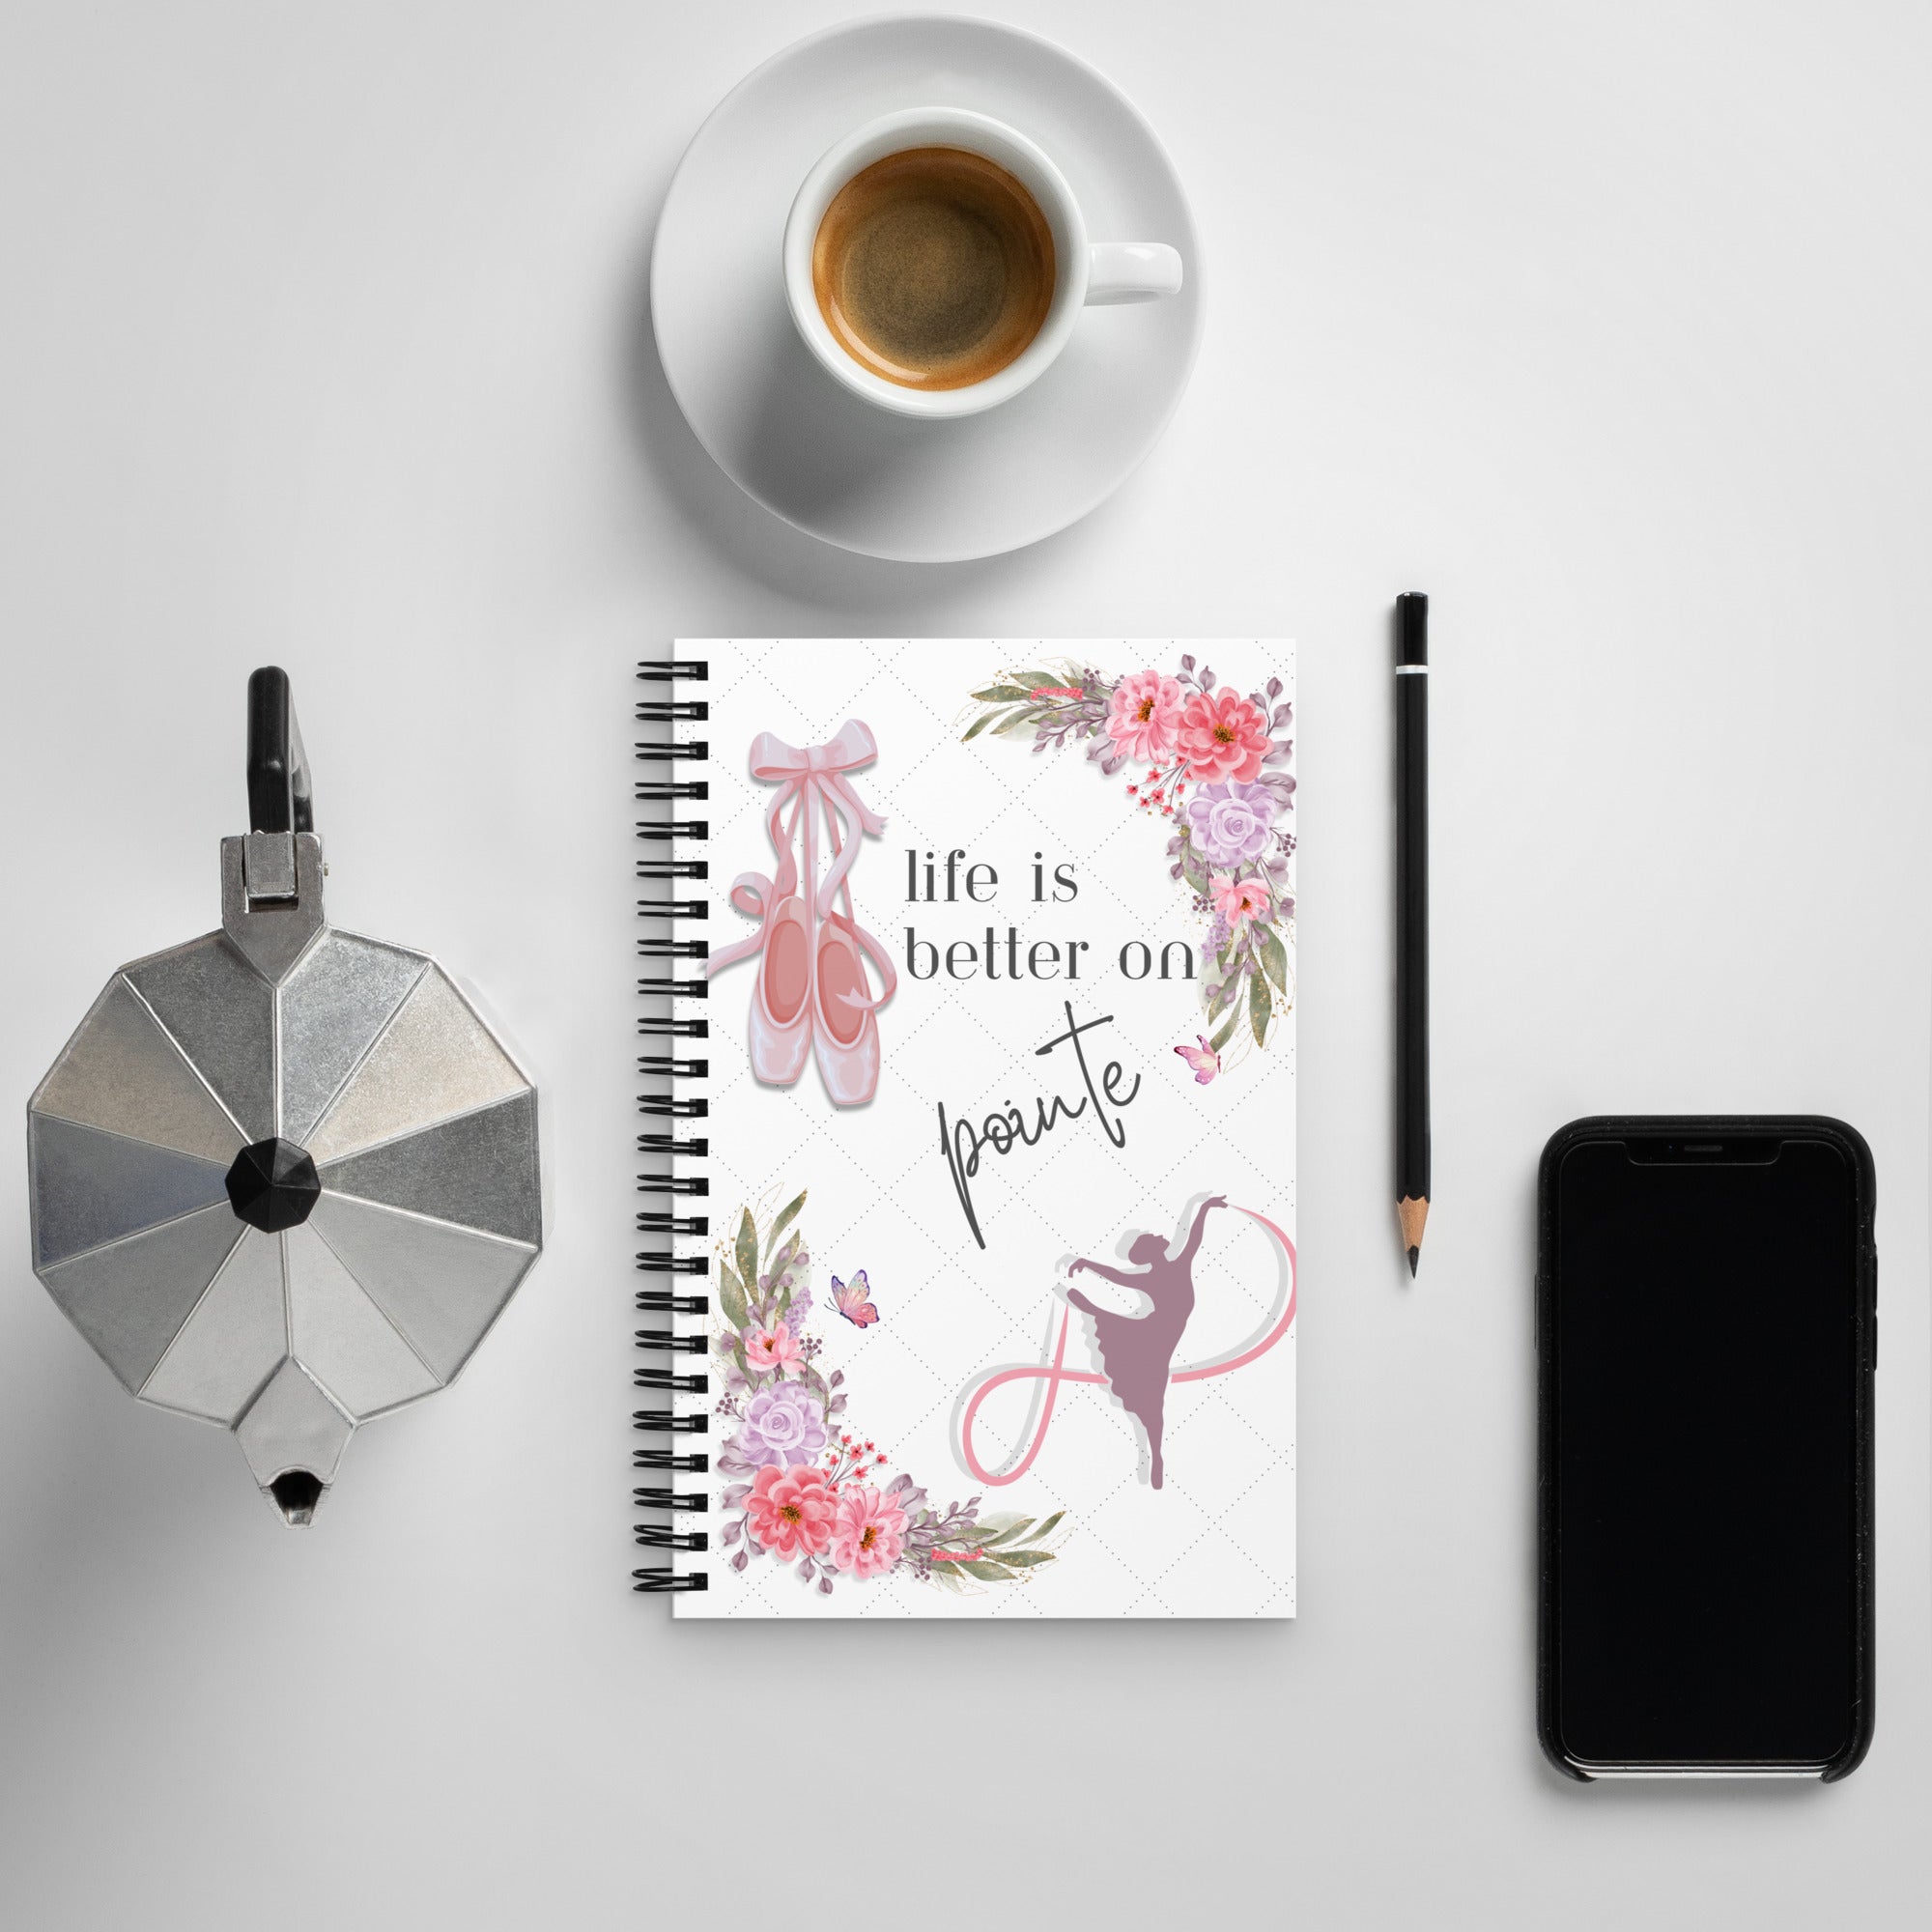 Life is better on point spiral notebook for ballerina dancers